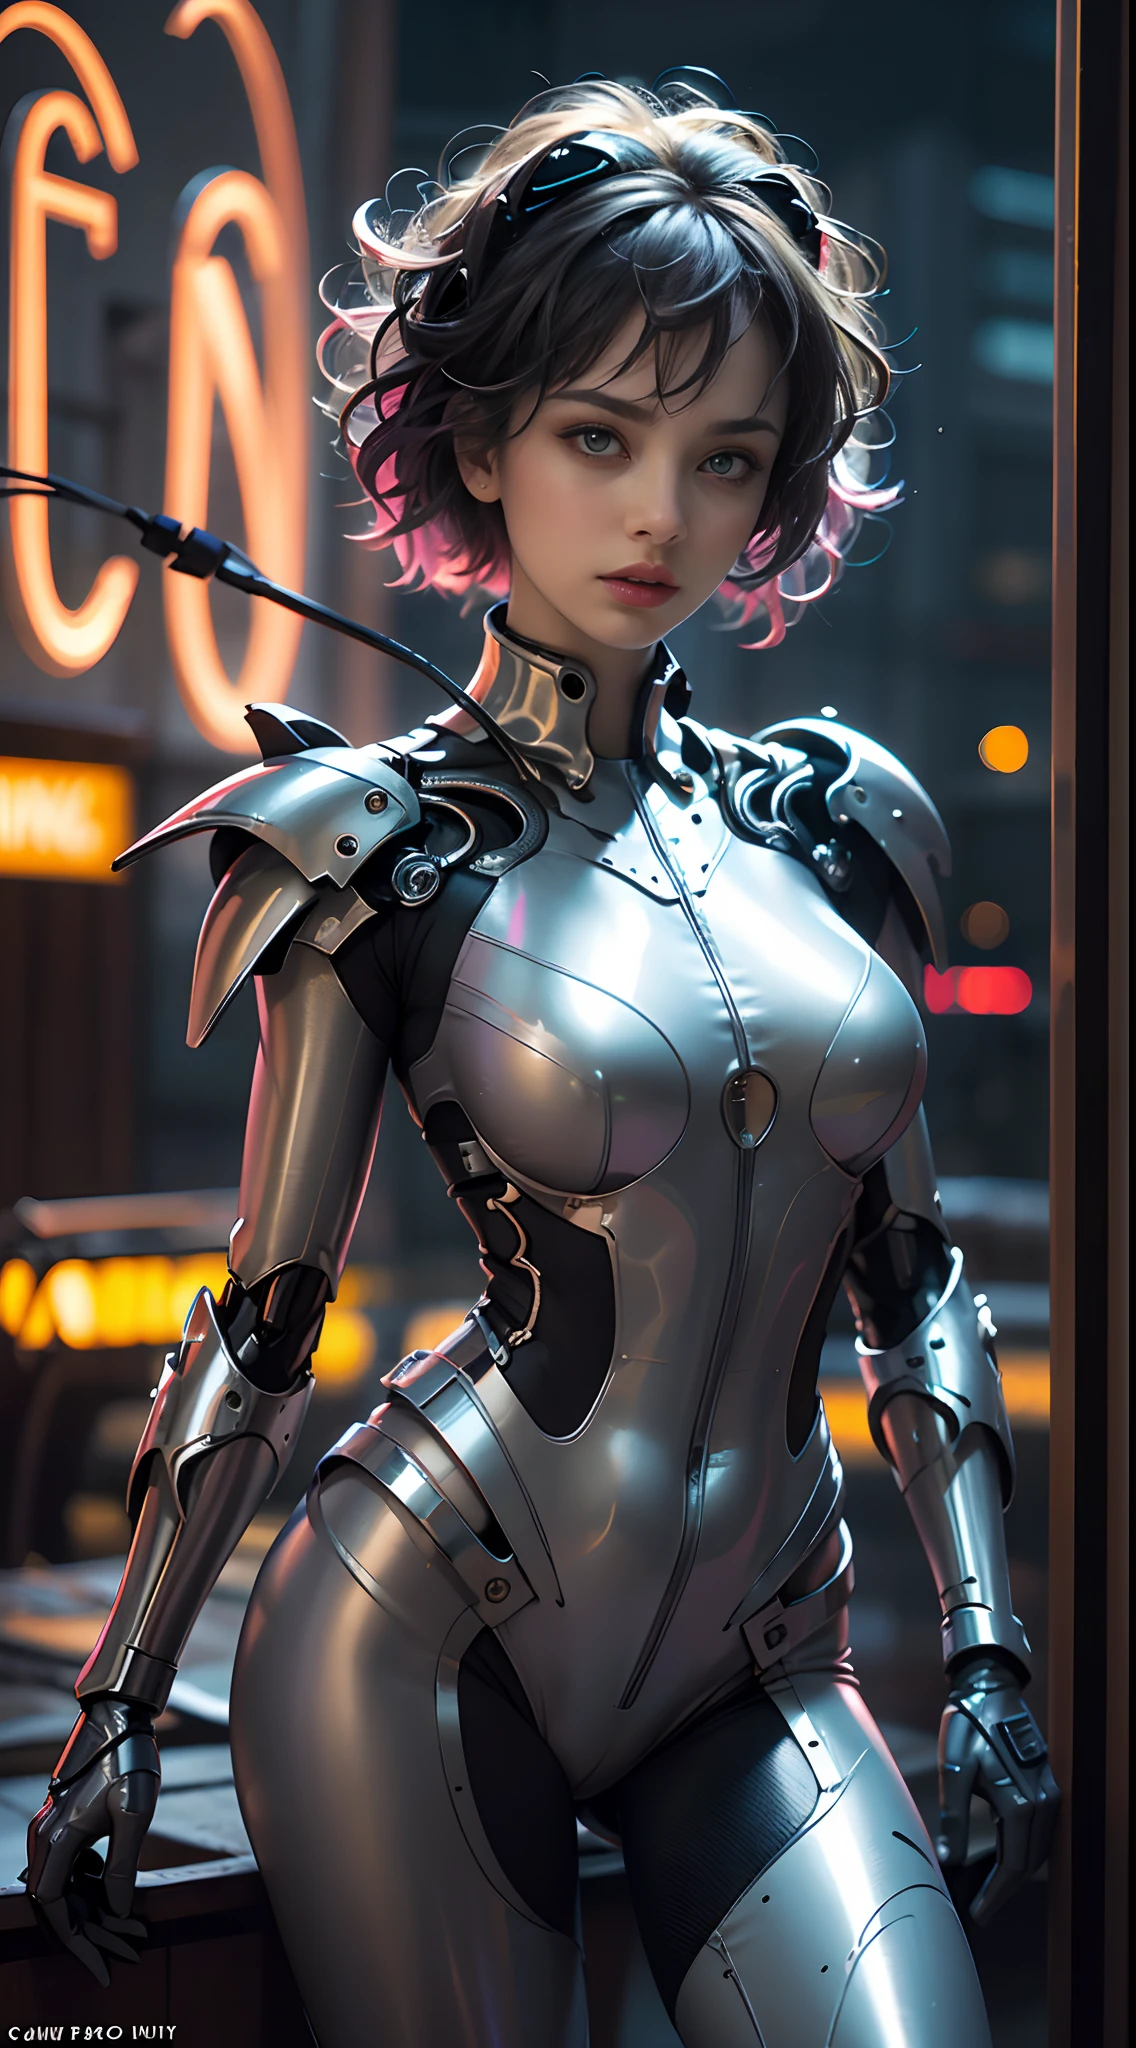 unreal engine:1.4,UHD,La Best Quality:1.4, photorealistic:1.4, skin texture:1.4, Masterpiece:1.8,first work, Best Quality, 1girl, Ives Girl, mecha, beautiful  lighting, (neon light: 1.2), (evening: 1.5), "first work, Best Quality, 1chica, Full length portrait, pose sensual, blue eyes, multicolored hair+the payment:1.3+yellow:1.3+green:1.3, Sculpted legs and tempting curves, full breasts, Beautiful face, many drops of water, clouds, twilights, Open floor plan, watercolor, neon light:1.2, evening:1.5, mecha, beautiful  lighting, Bright neon light: 1.2, unforgettable mysterious night: 1.5",,beautiful fine hands